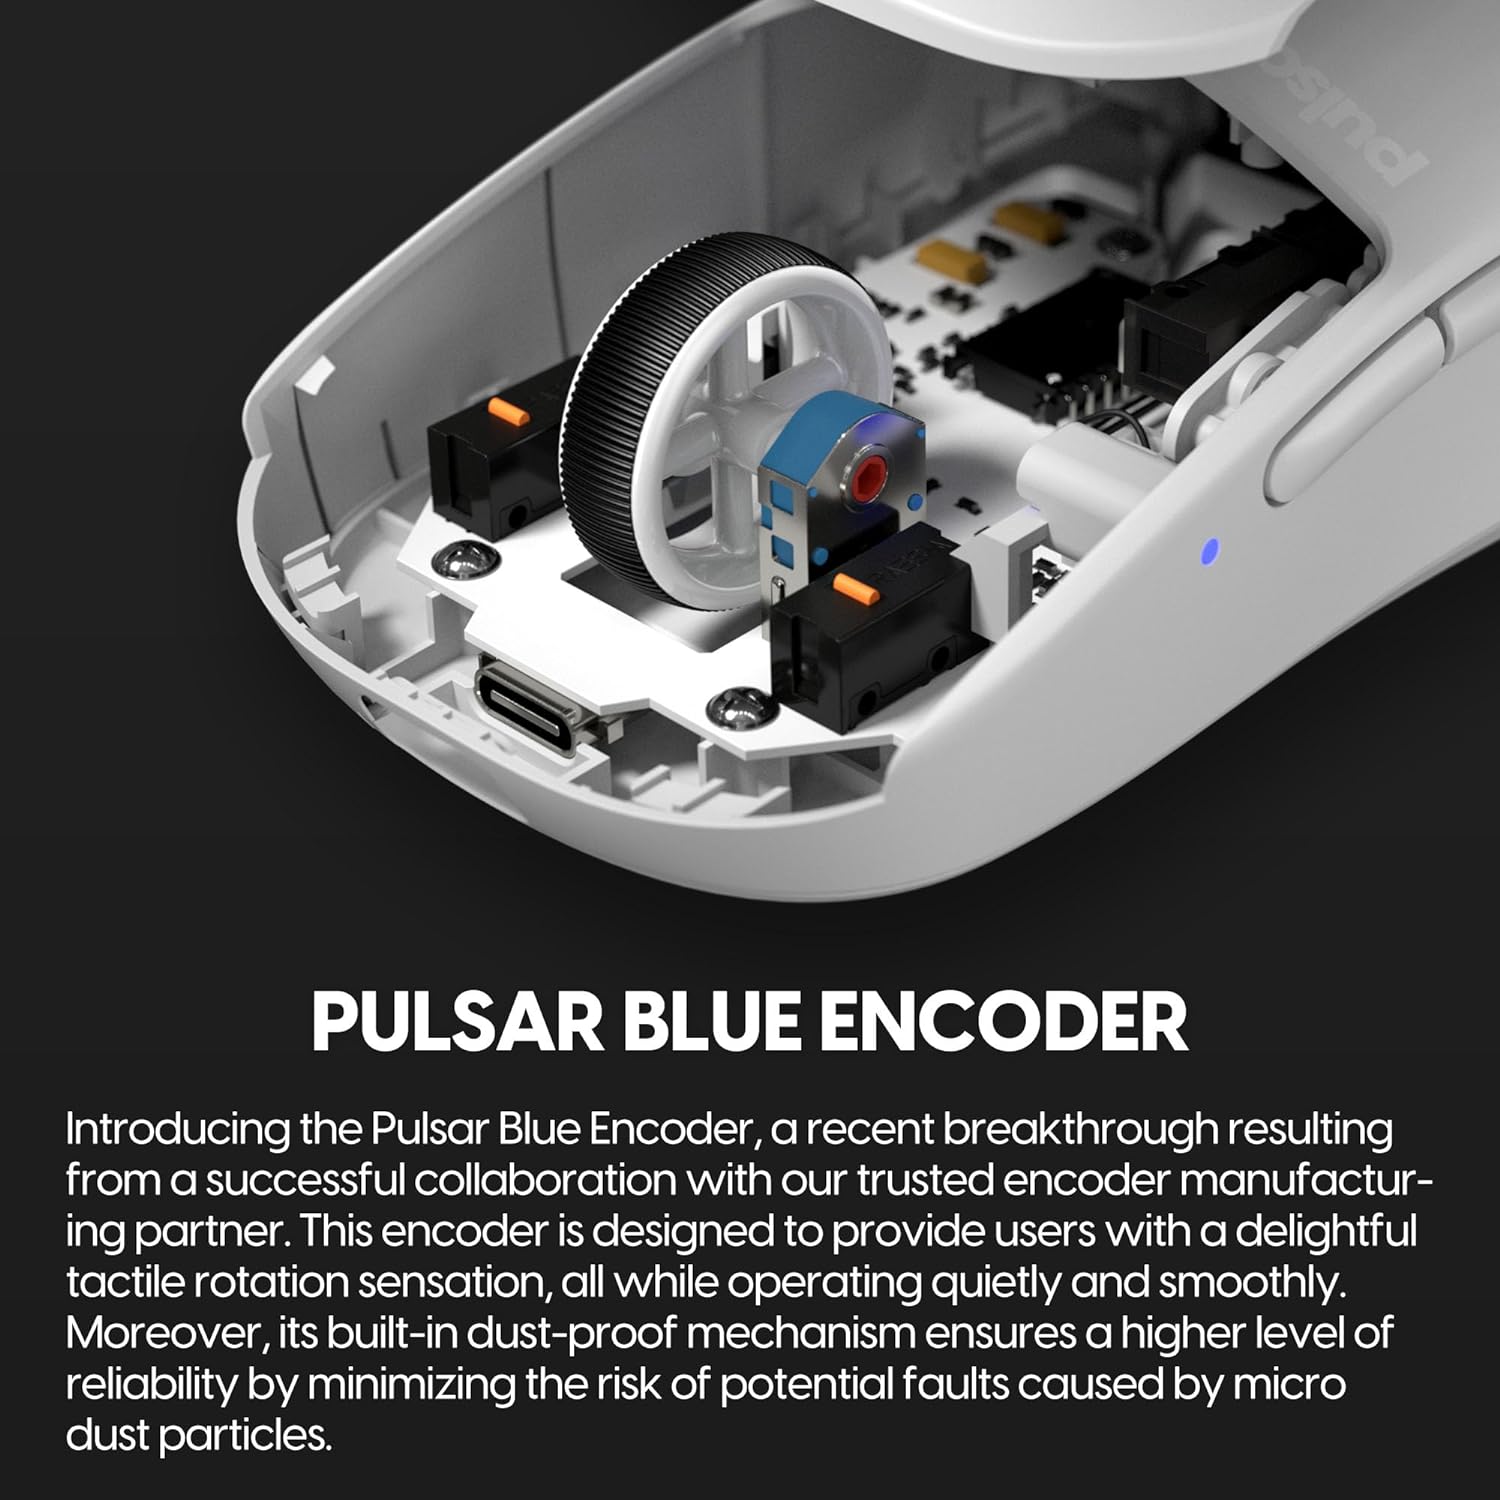 A large marketing image providing additional information about the product Pulsar X2H Wireless Gaming Mouse - White - Additional alt info not provided